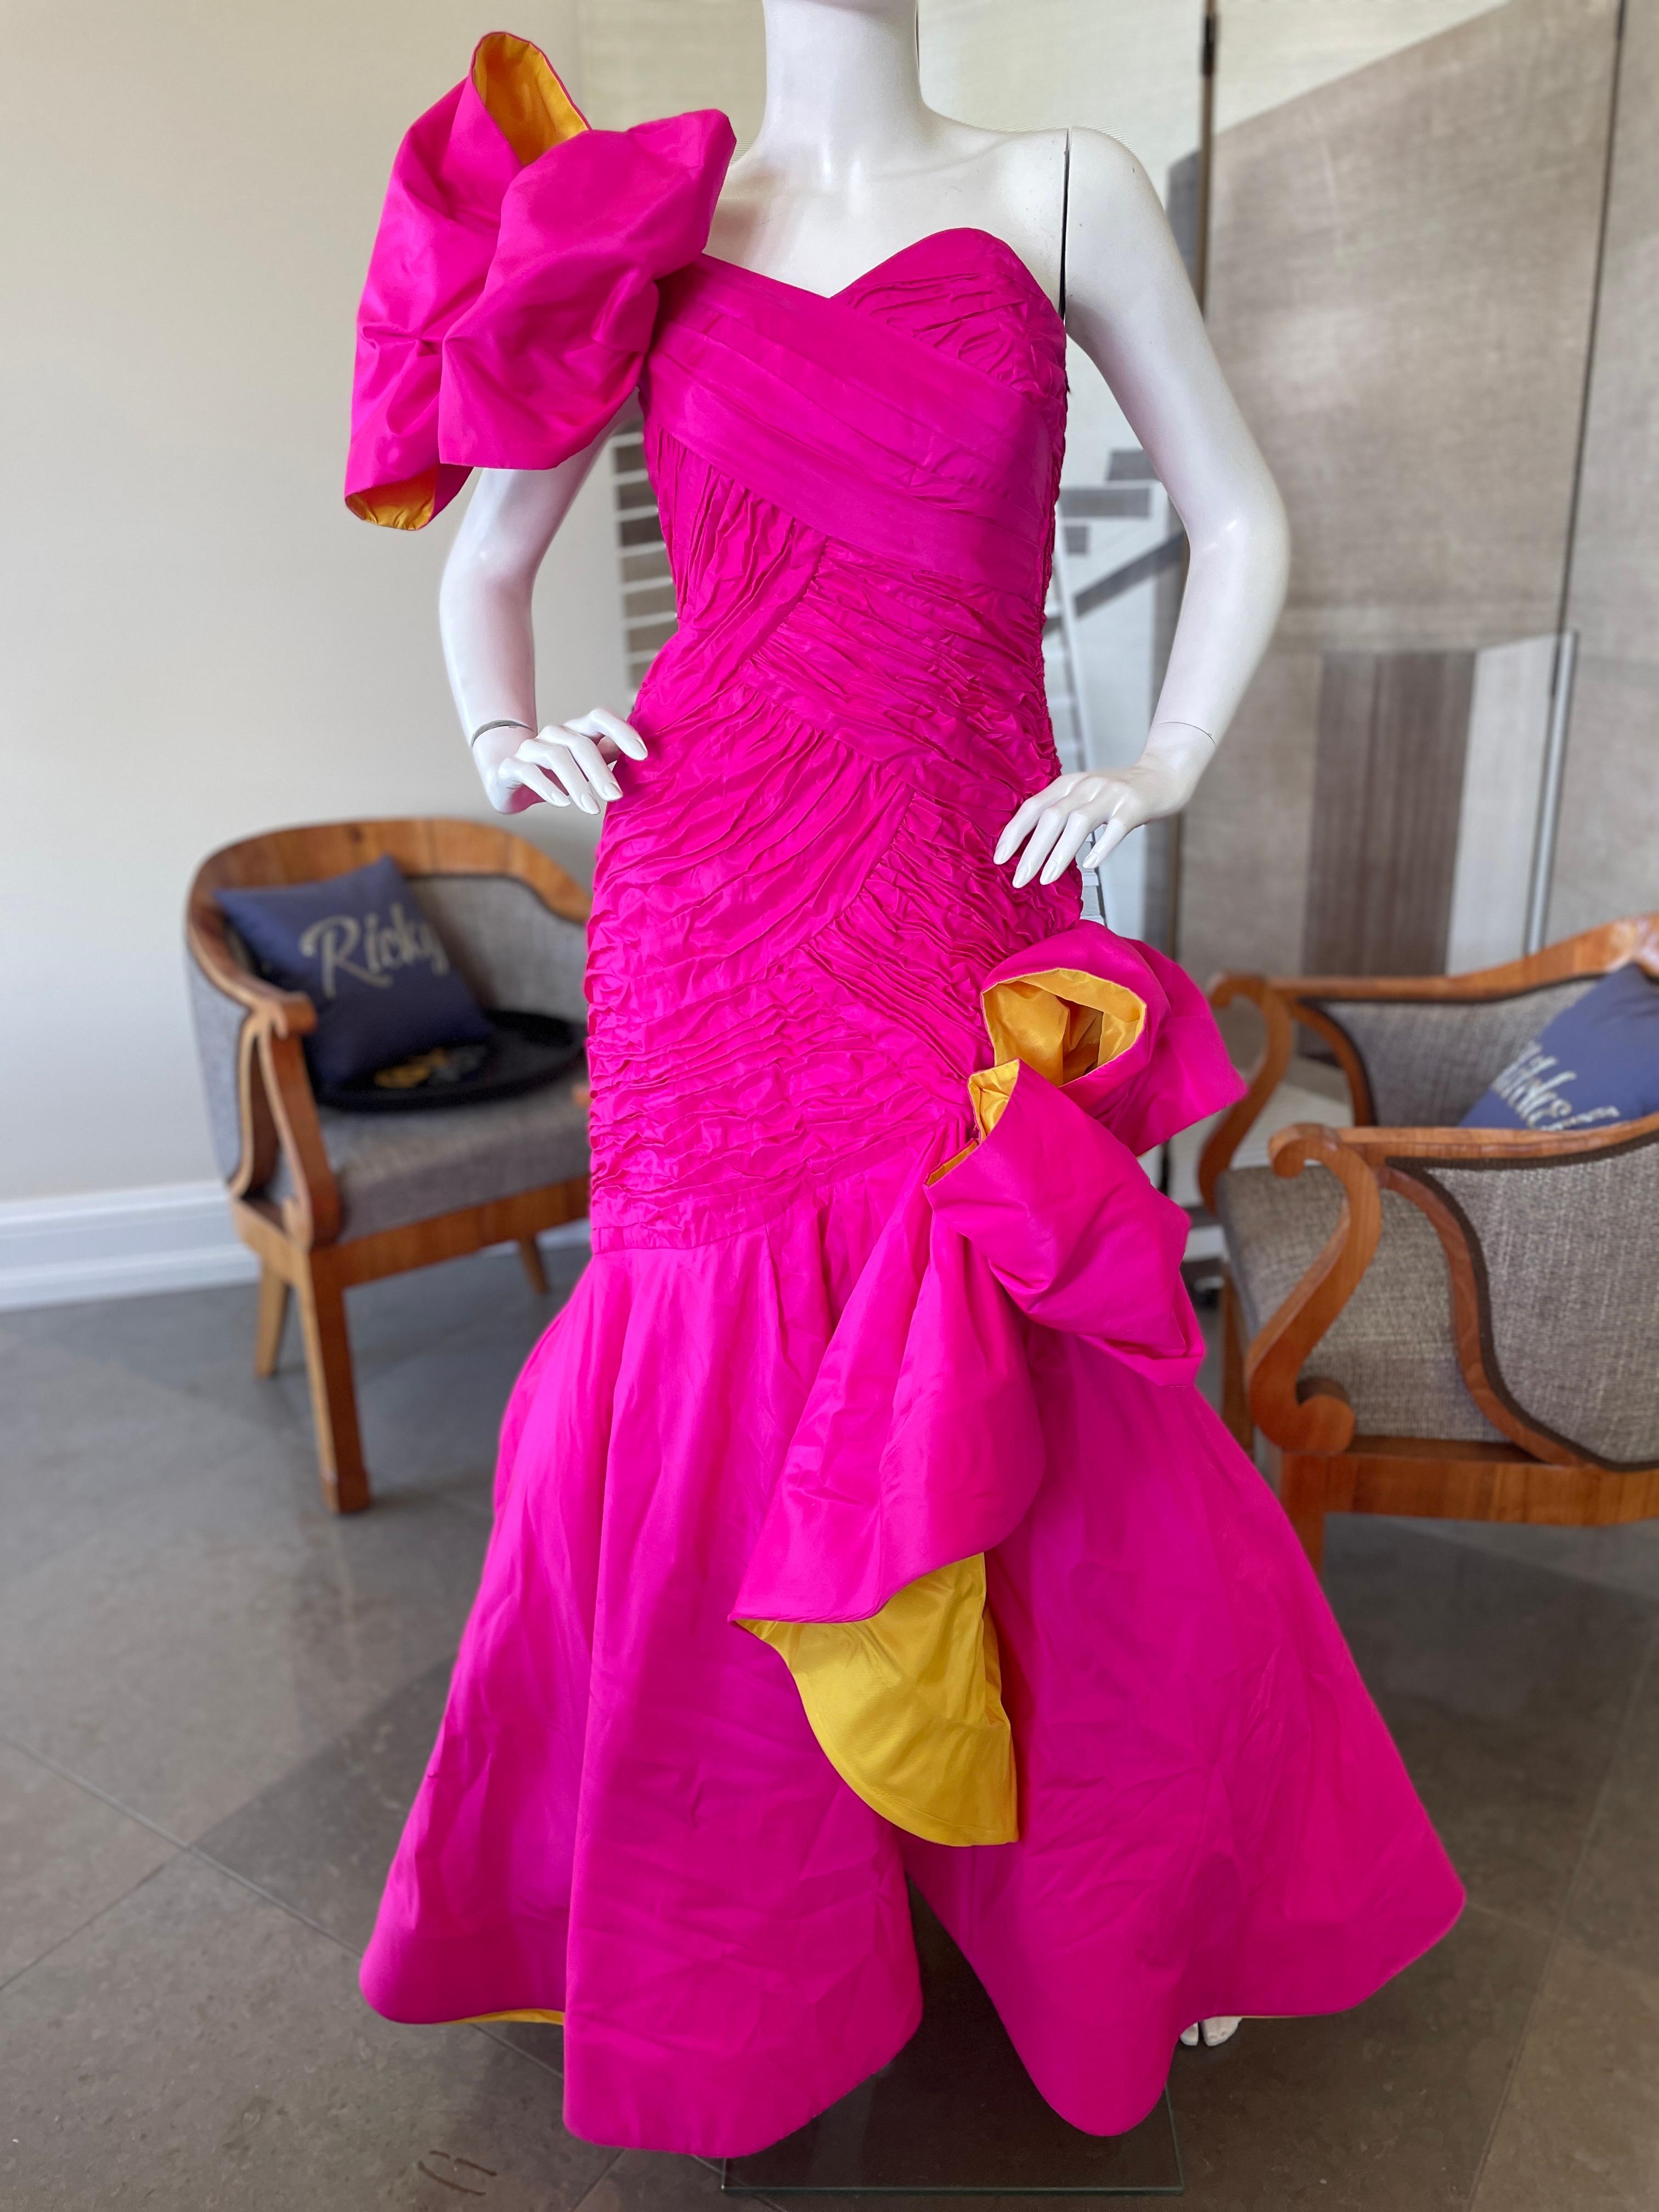 Scaasi 80's Strapless Hot Pink Mermaid Ball Gown with Yellow Trim
This is so dramatic, photos don't capture it, it's WOW.
Size Small, there is no size label
 Bust 34